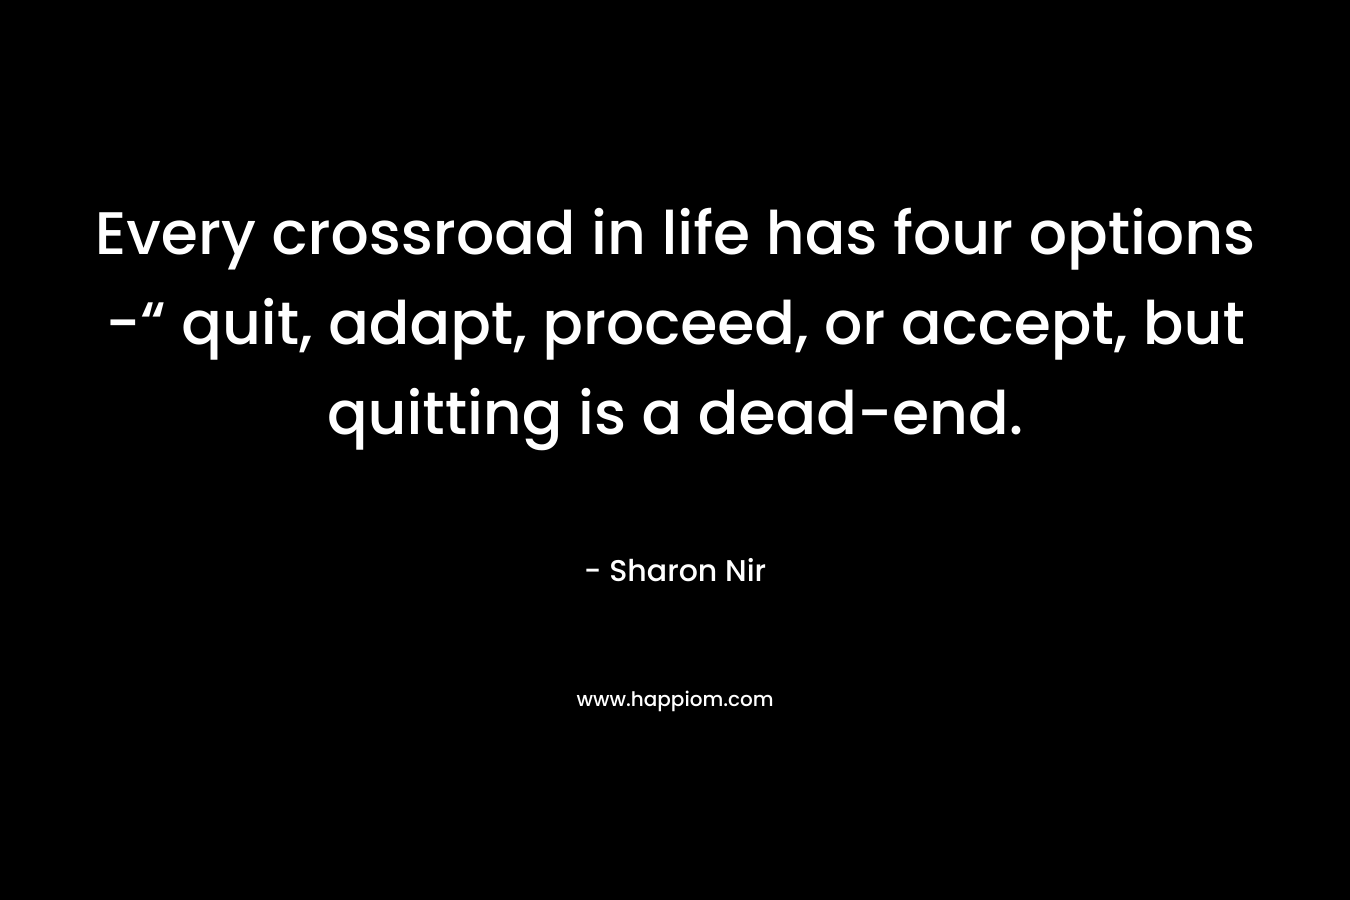 Every crossroad in life has four options -“ quit, adapt, proceed, or accept, but quitting is a dead-end. – Sharon Nir